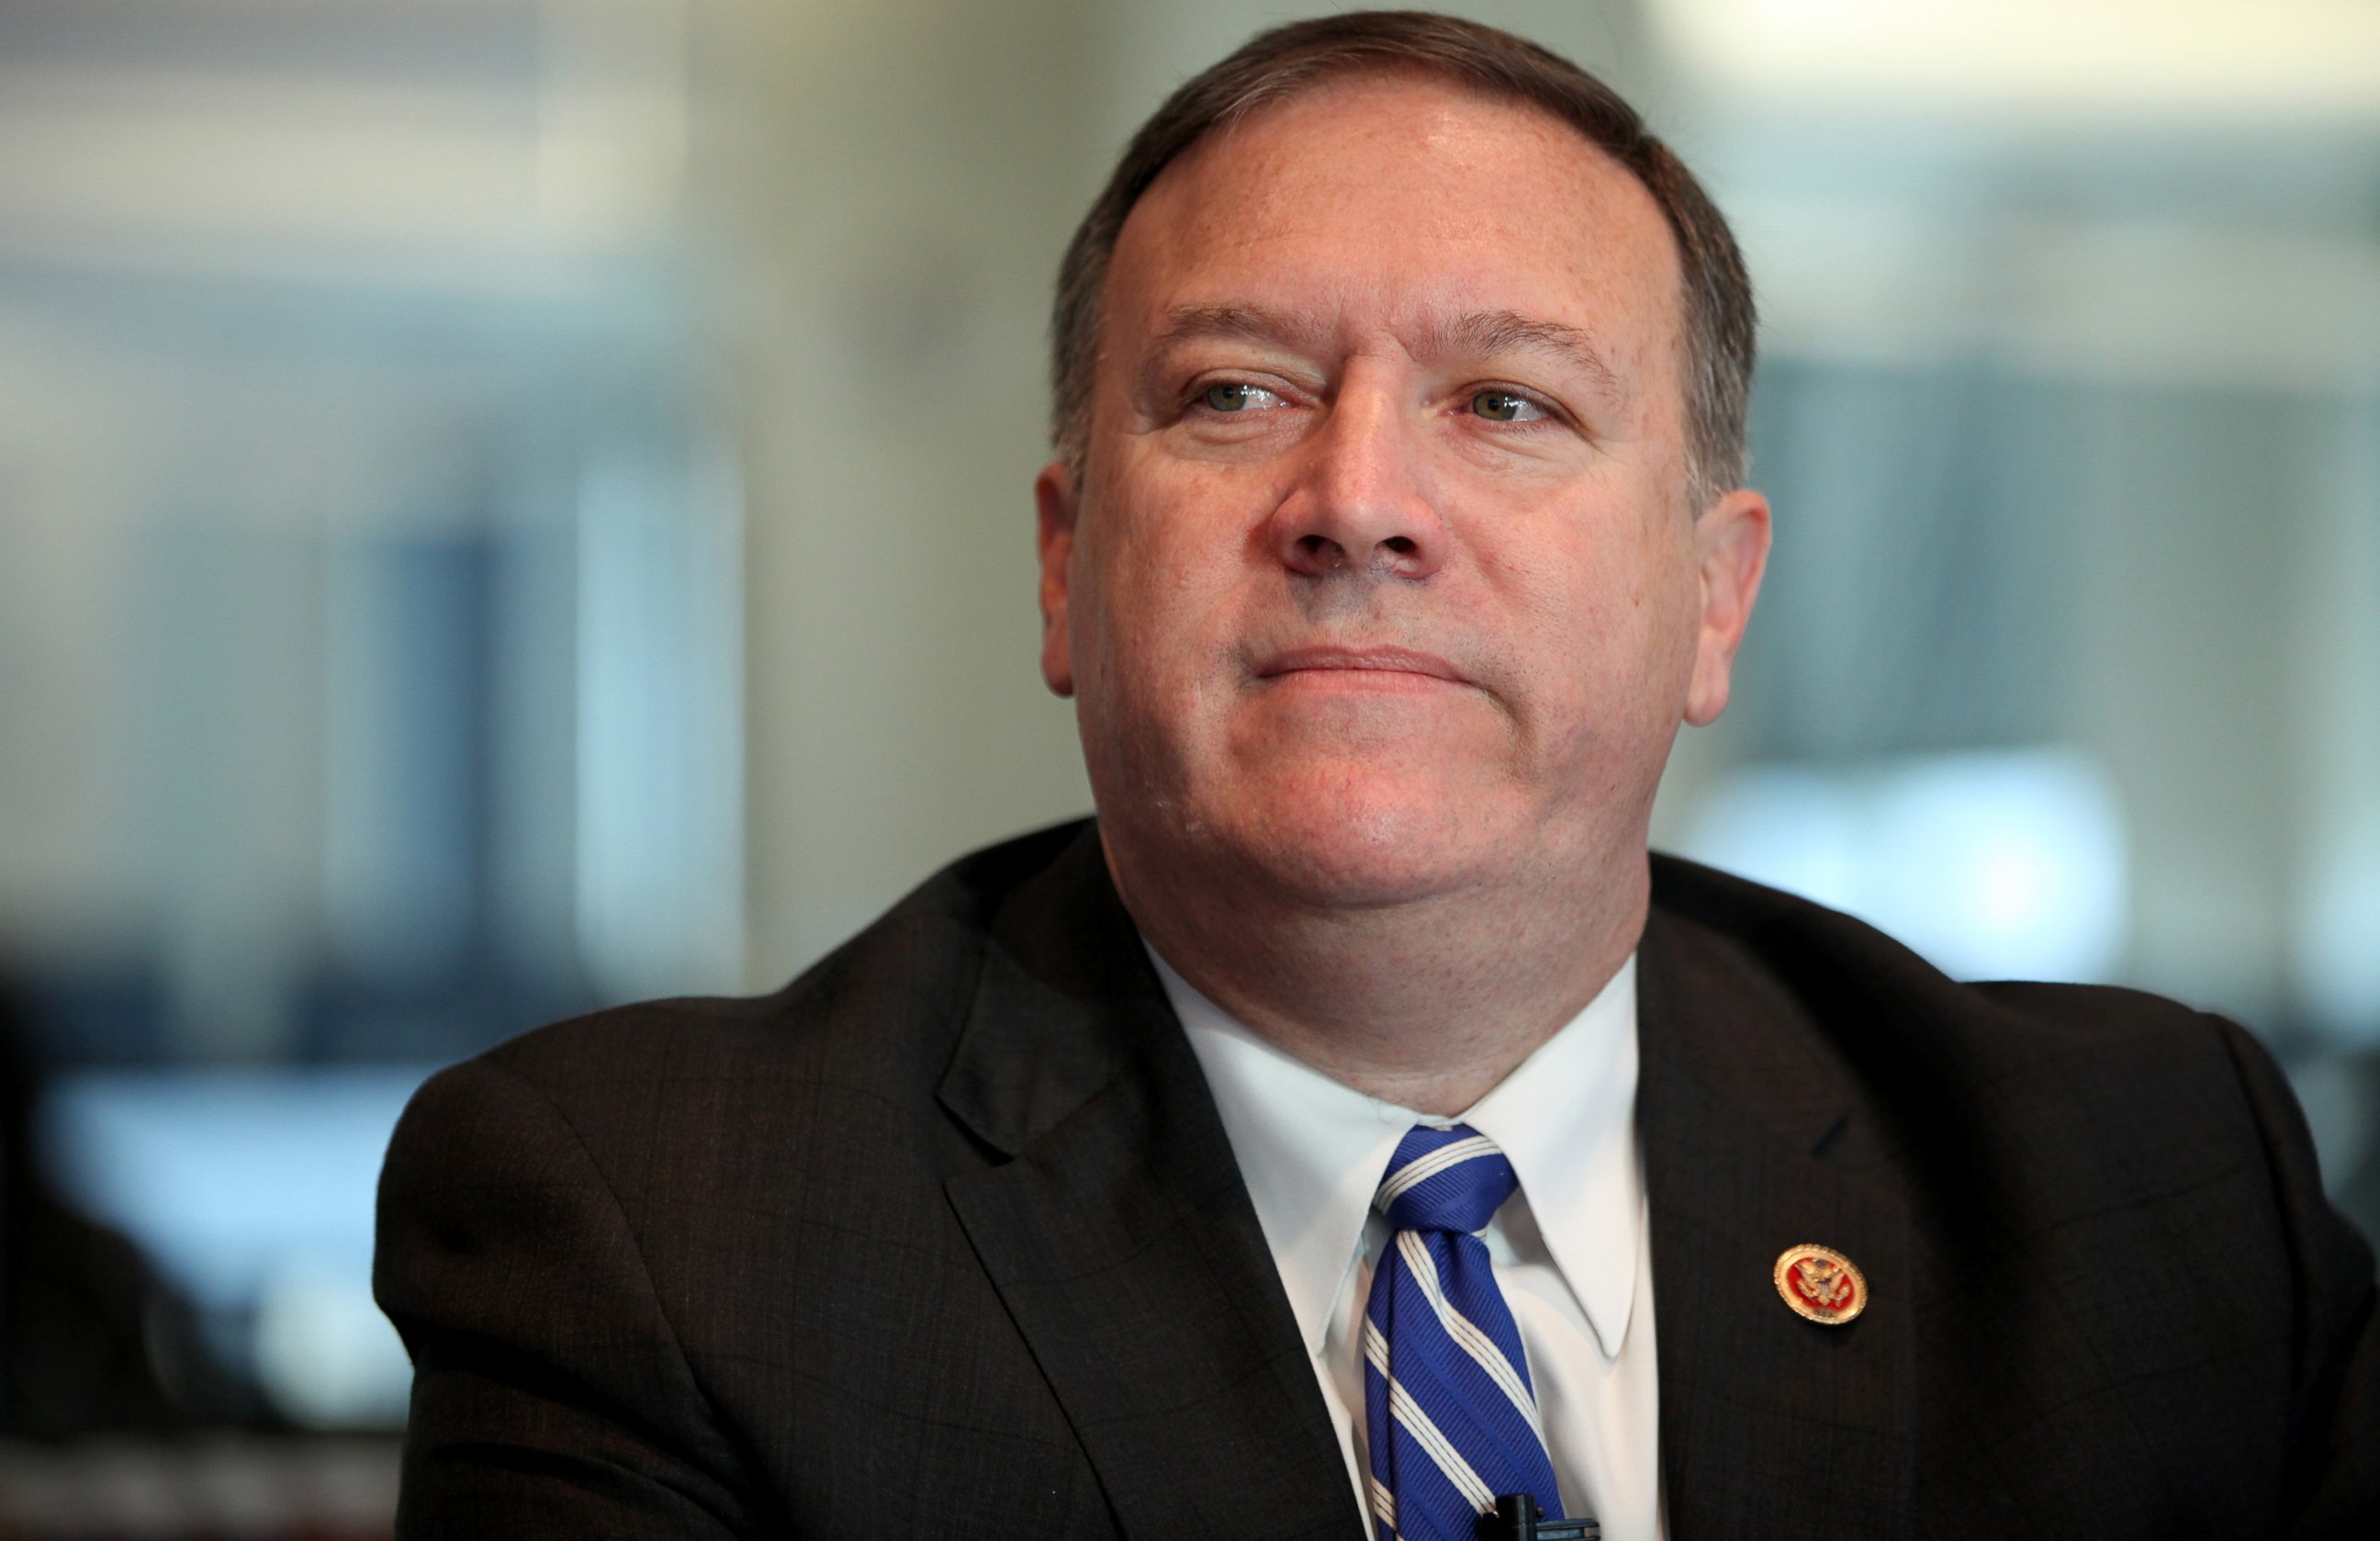 PHOTO: Representative Michael "Mike" Pompeo, a Republican from Kansas, pauses during an interview in Washington, Sept. 20, 2013. 